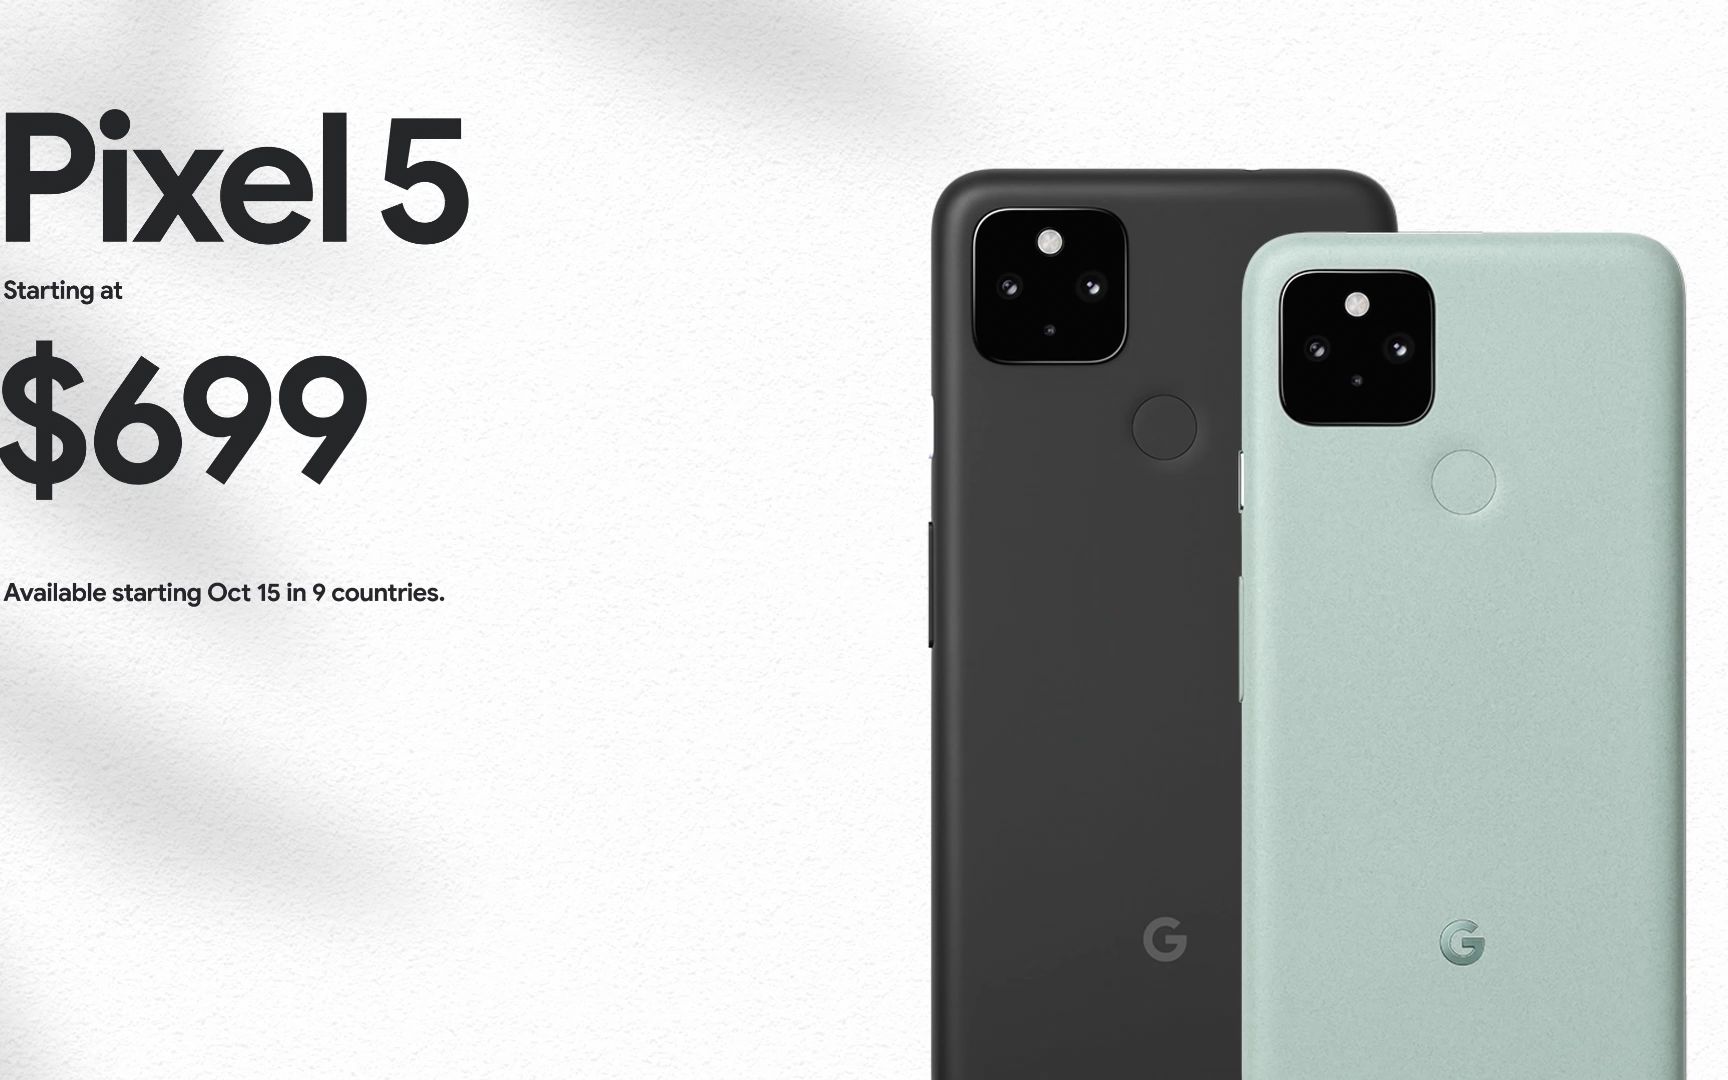 New Pixel 4a (5G) and Pixel 5